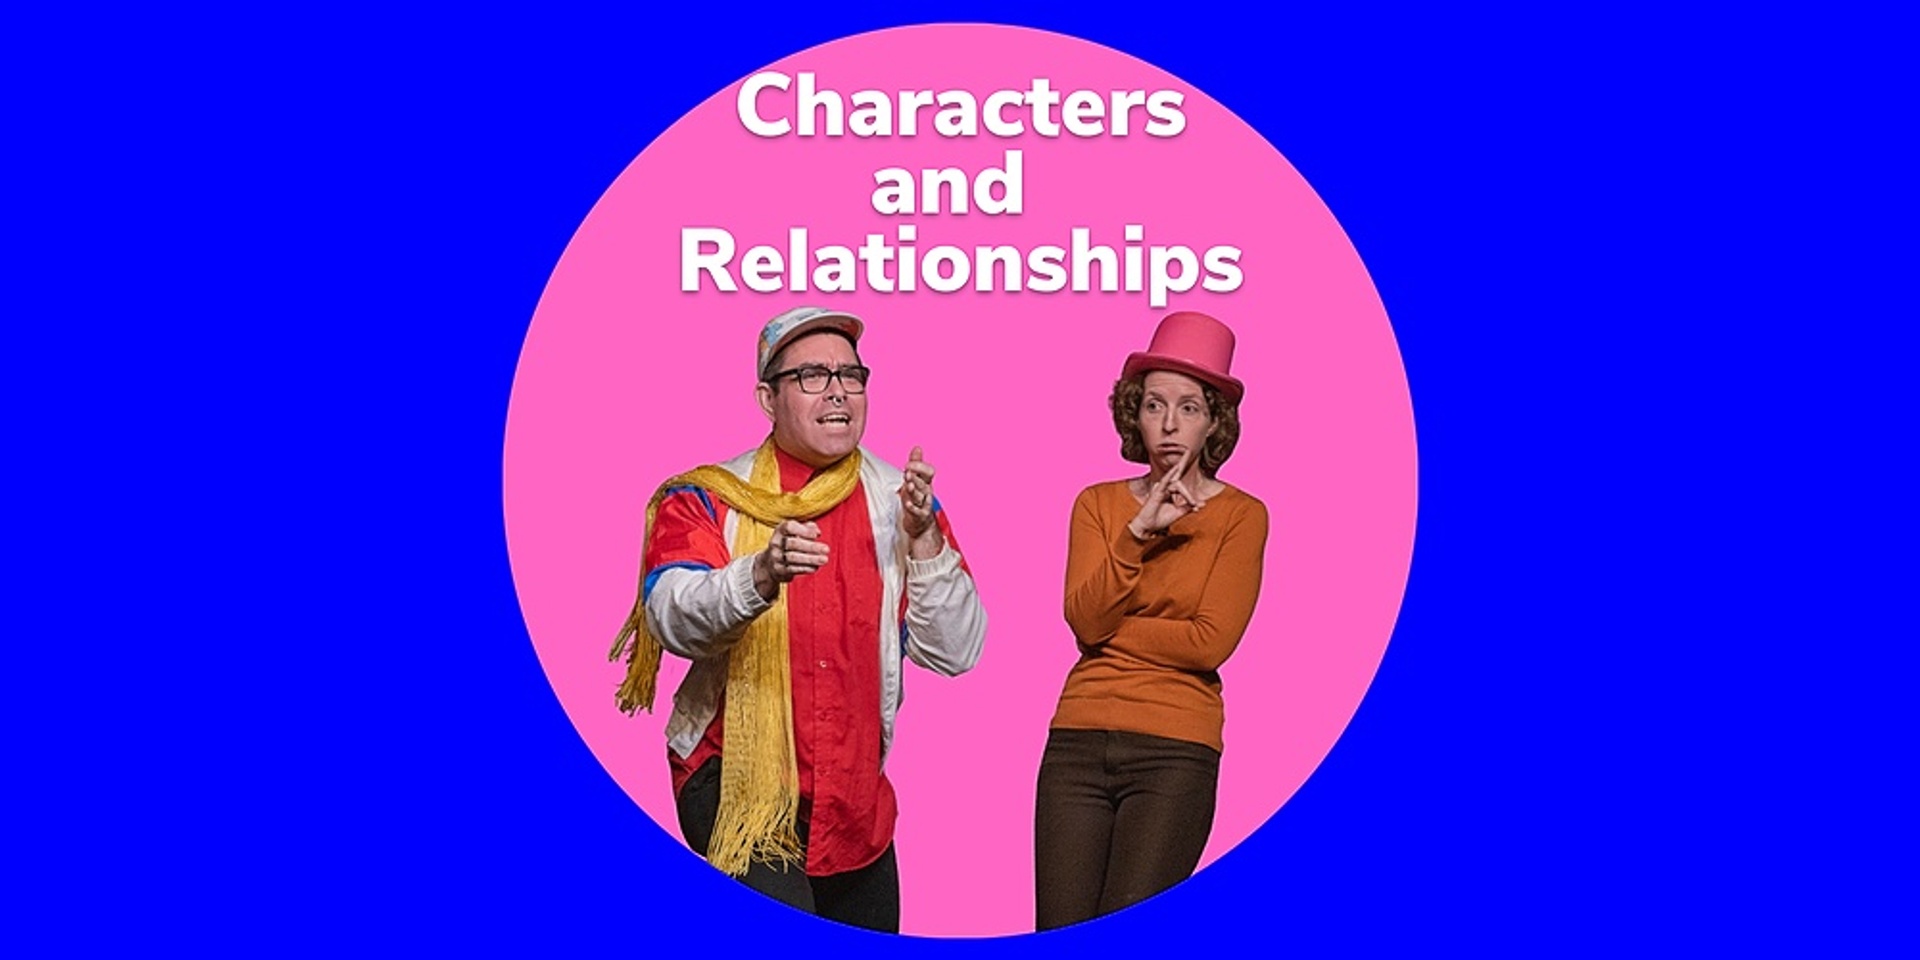 Level 3 Improv "Characters and Relationships"